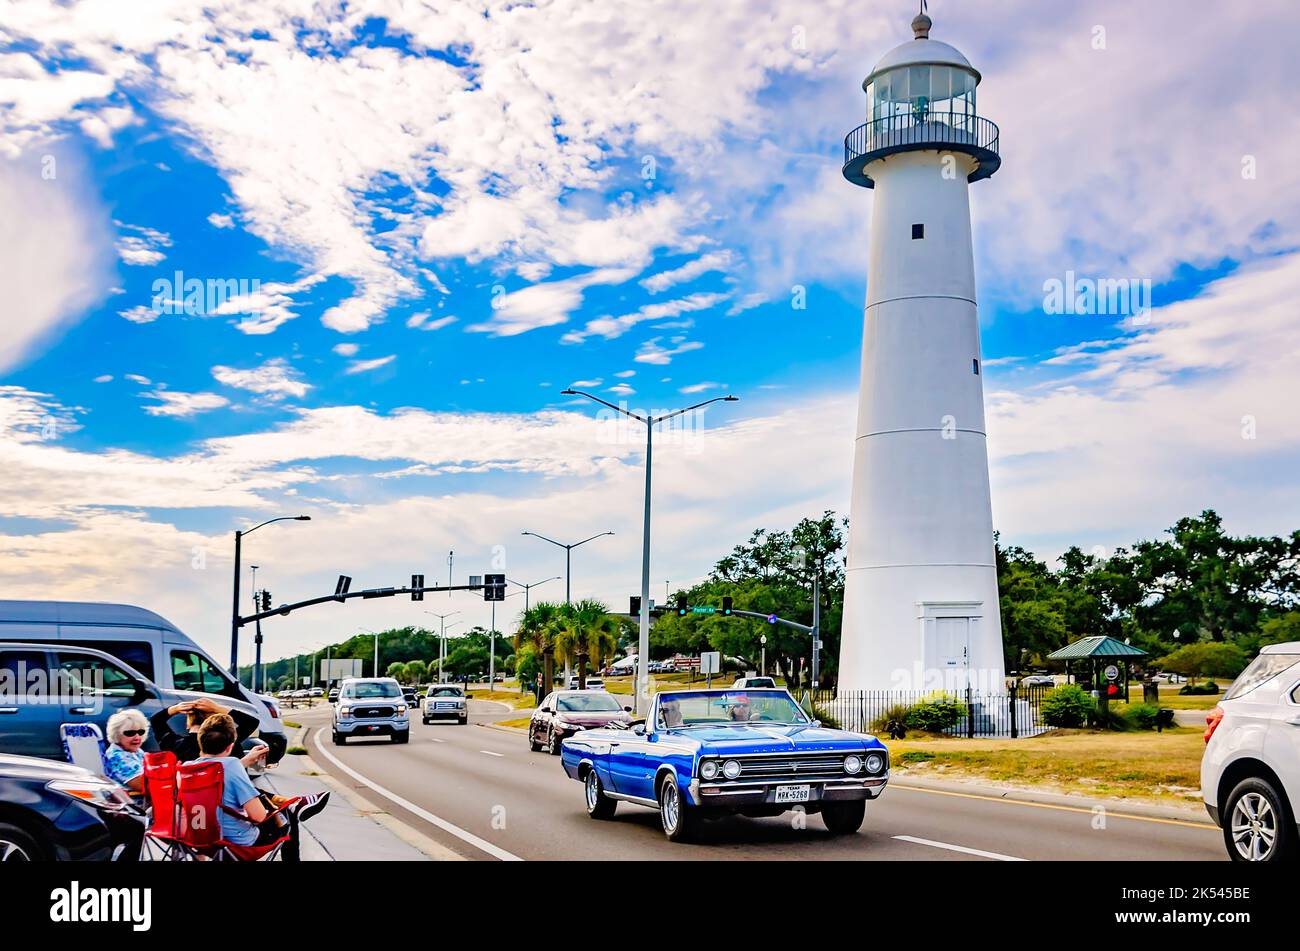 A vintage Oldsmobile convertible passes the Biloxi lighthouse during the 26th annual Cruisin’ the Coast antique car festival in Biloxi, Mississippi. Stock Photo